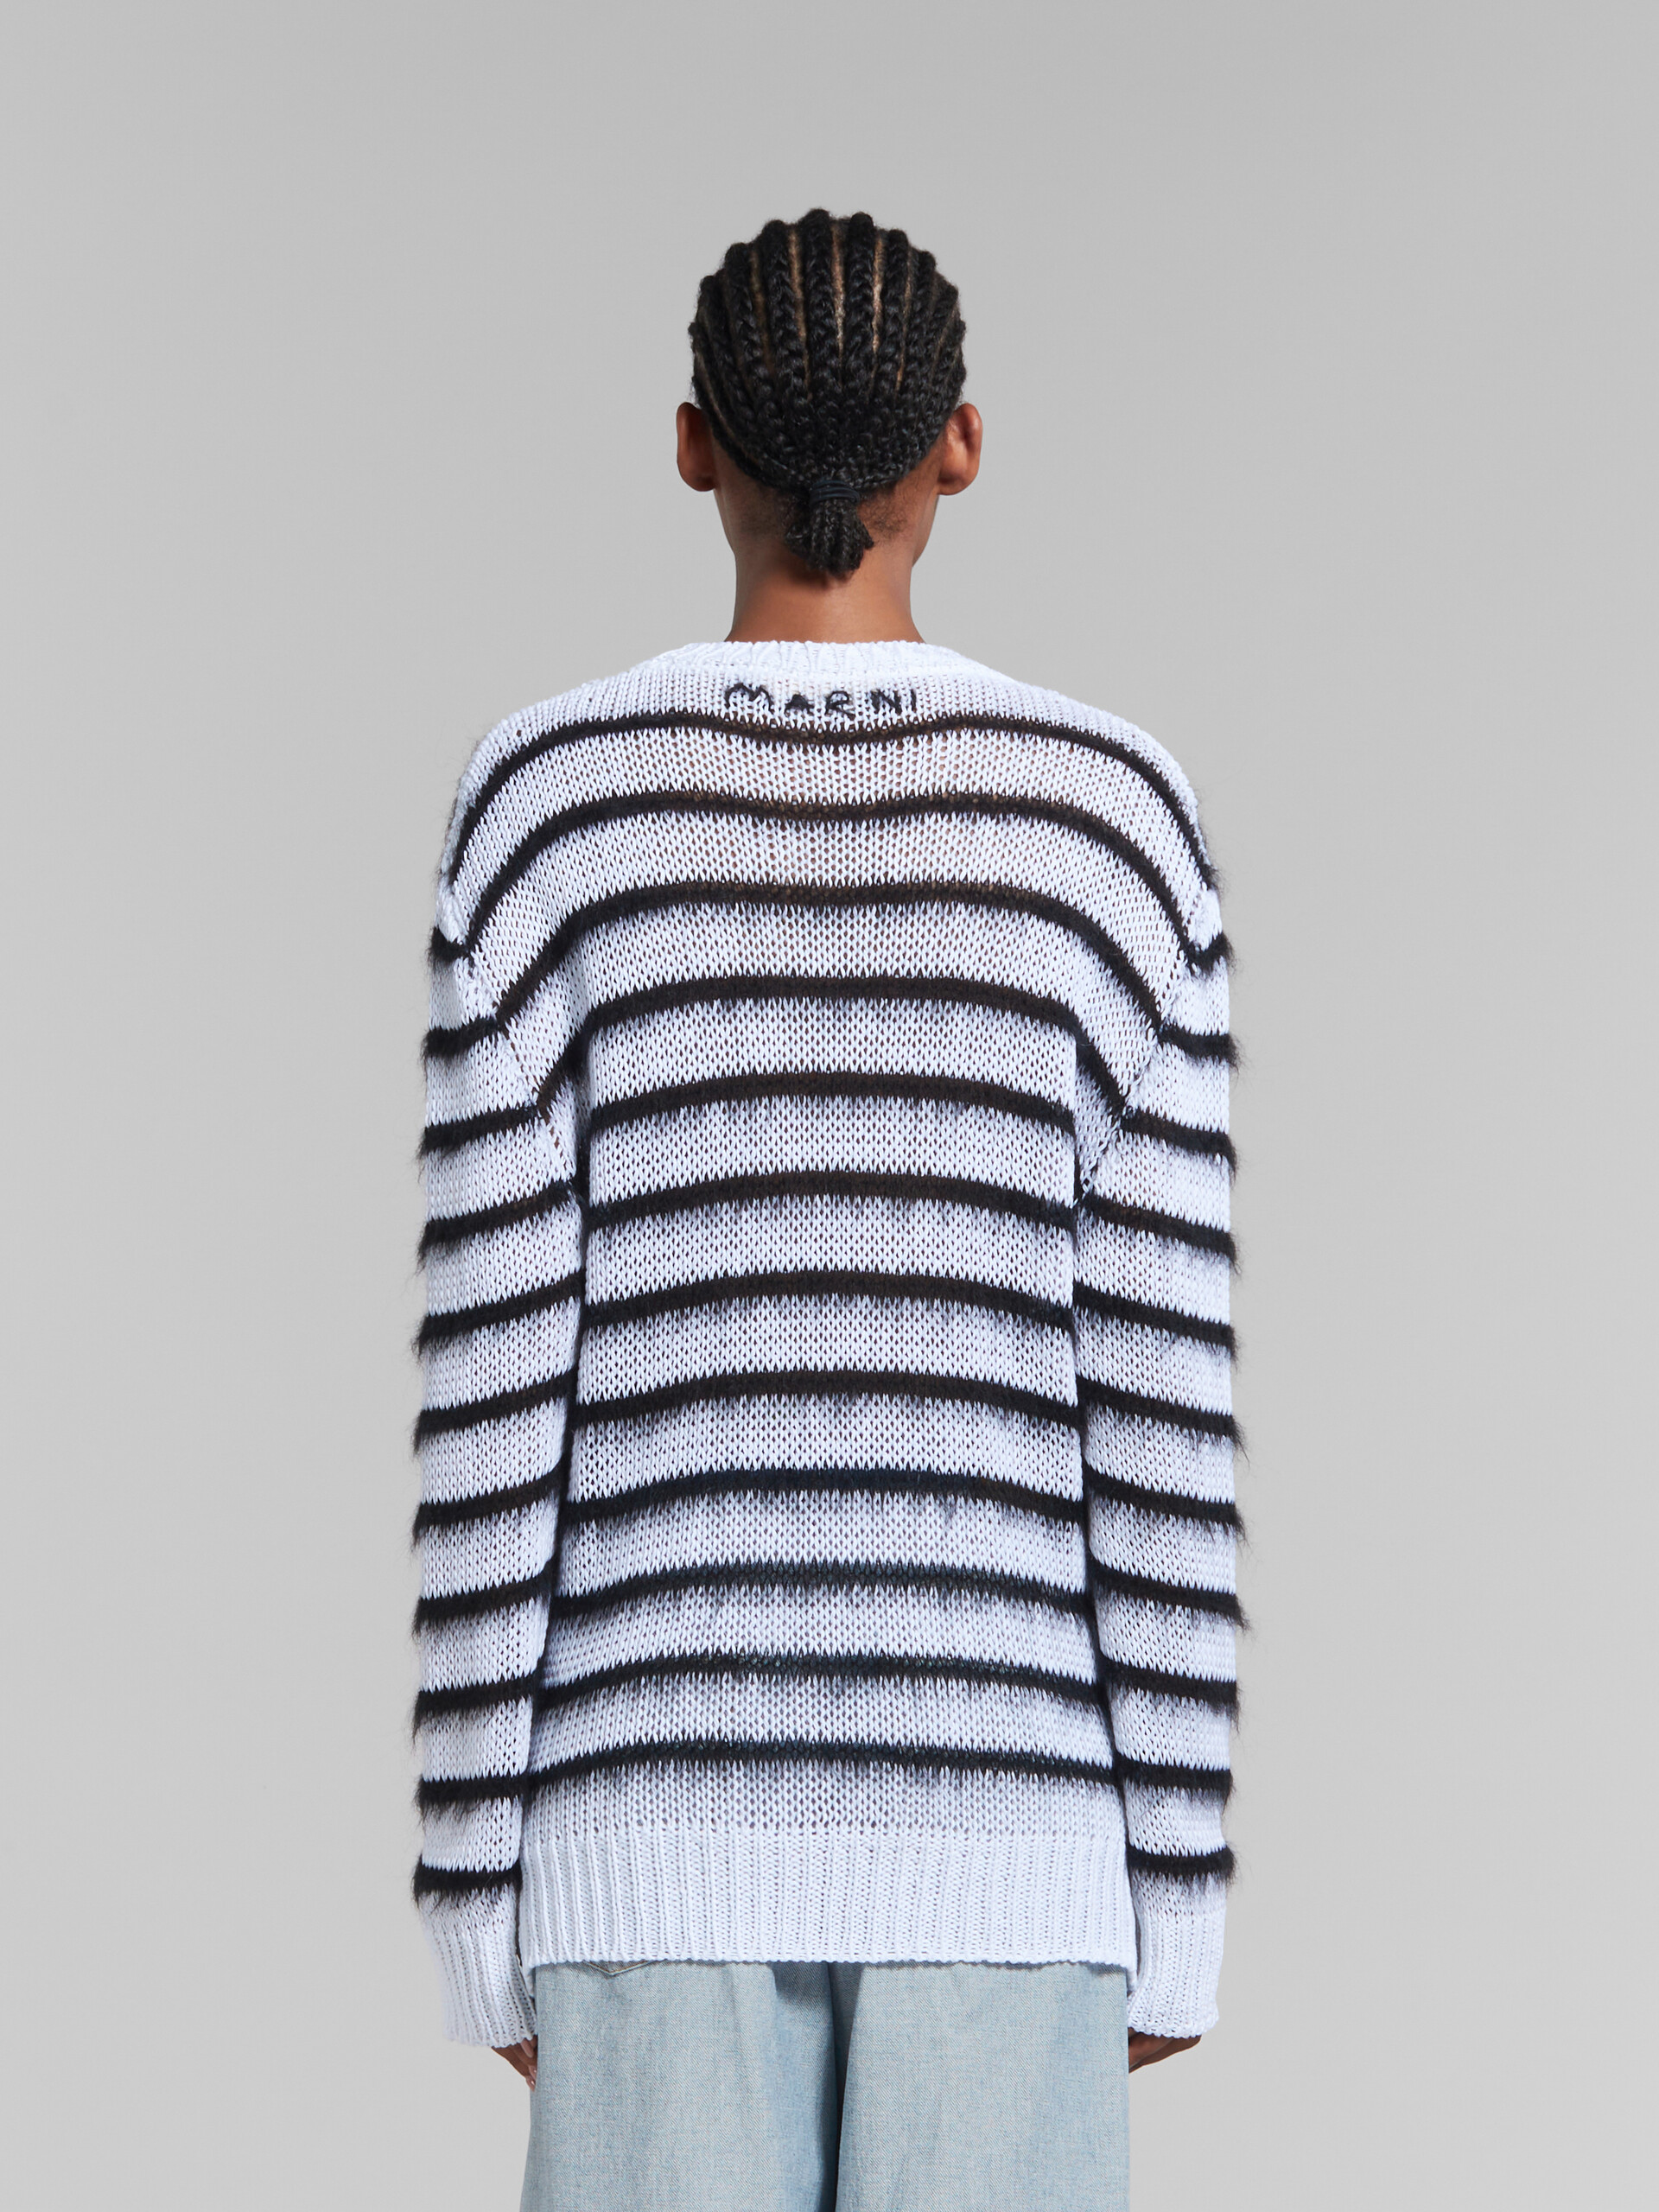 White jumper with black mohair stripes - Pullovers - Image 3